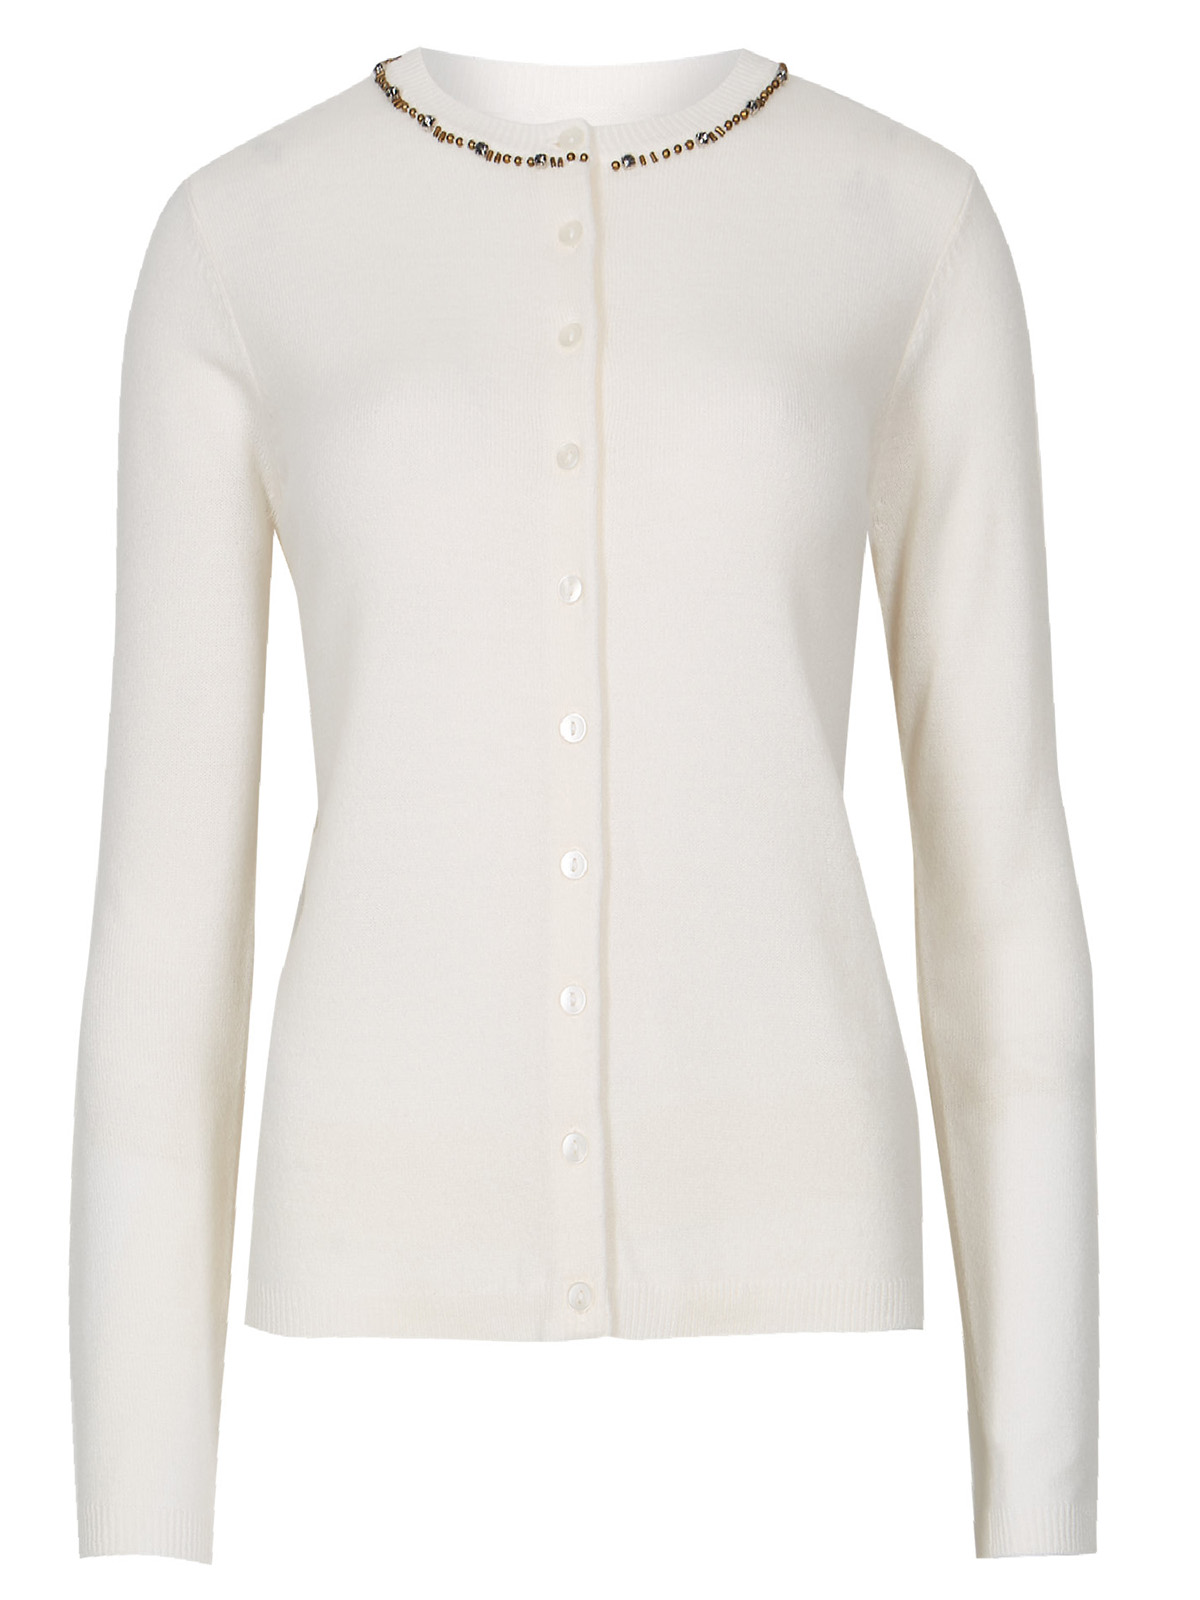 Marks and Spencer - - M&5 CREAM Bead Embellished Button Through ...